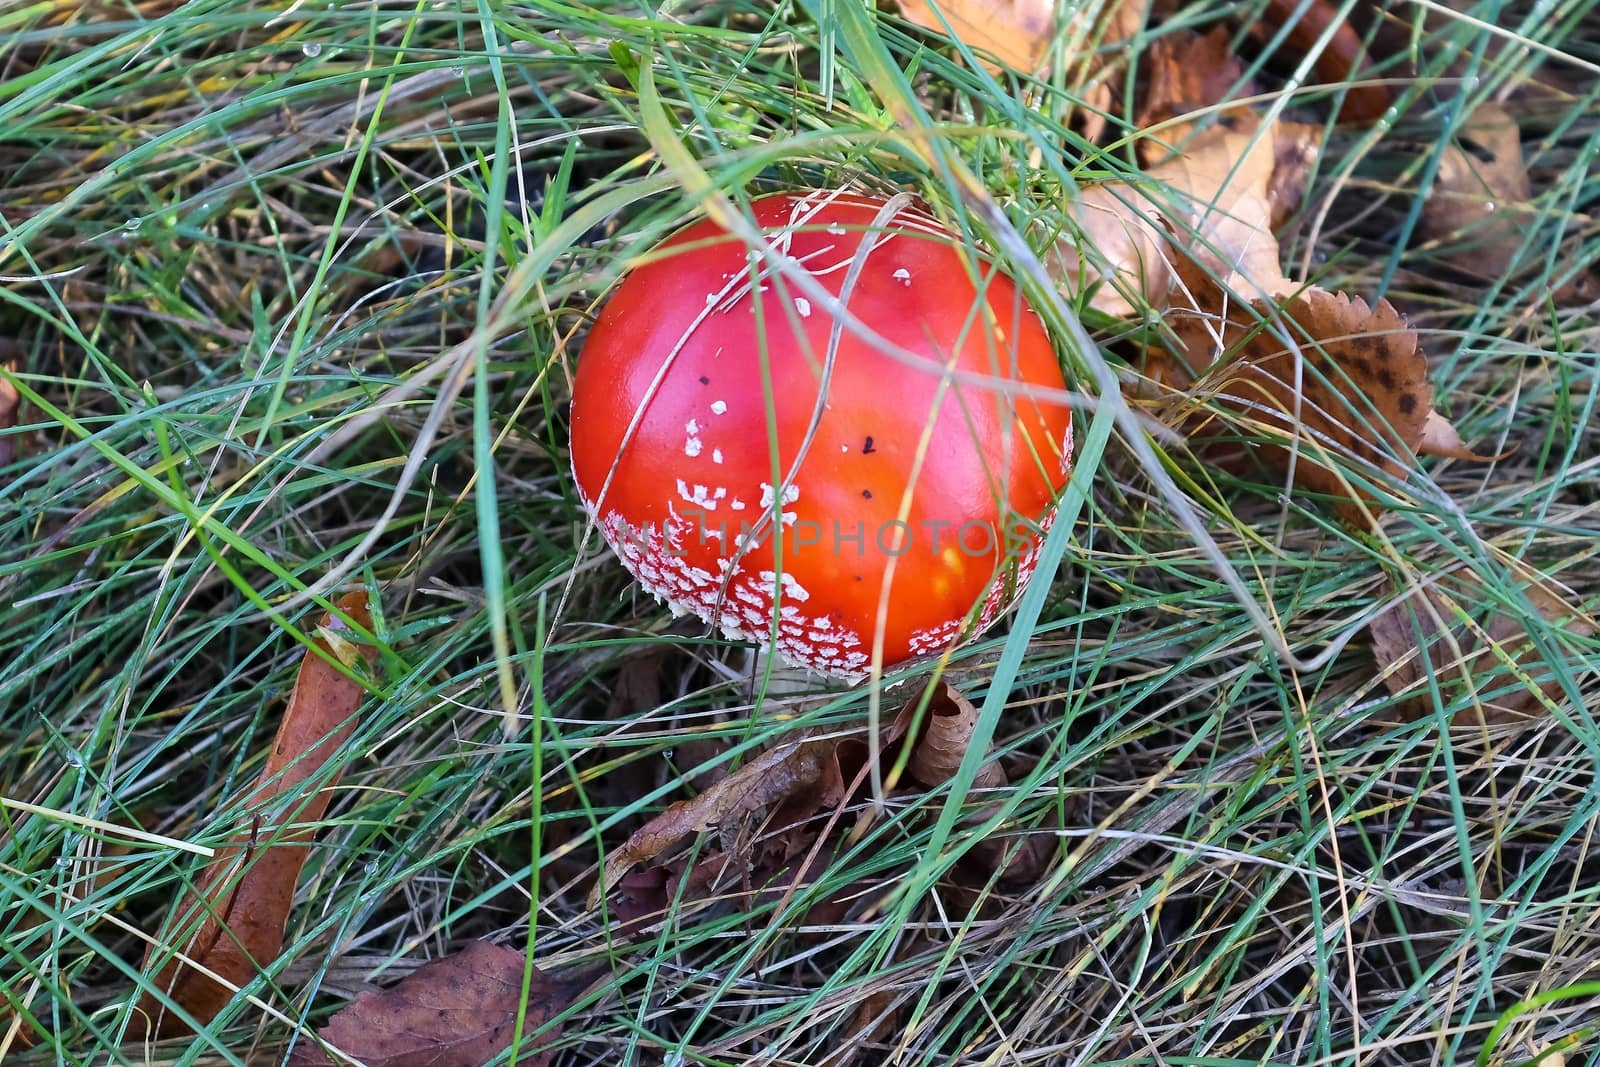 Red poisonous mushroom Amanita muscaria known as the fly agaric  by MP_foto71